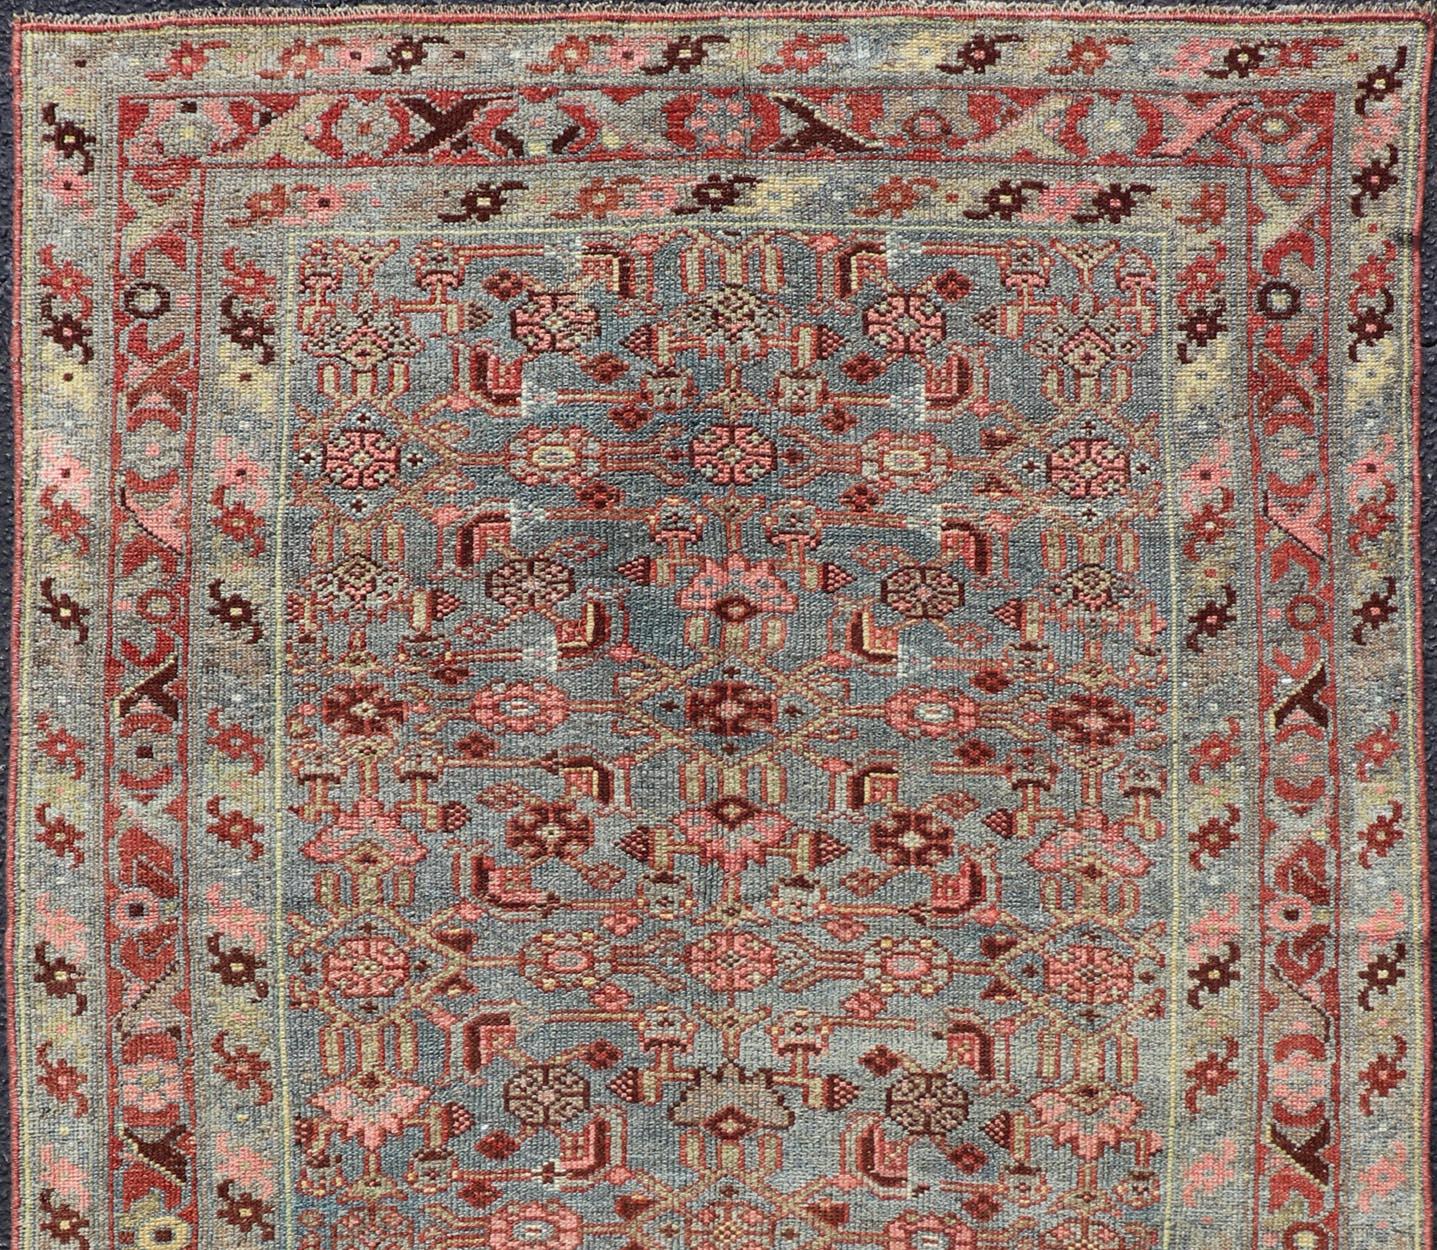 Antique Persian Kurdish Rug in Blue, Green, Brown, and Soft Red In Good Condition For Sale In Atlanta, GA